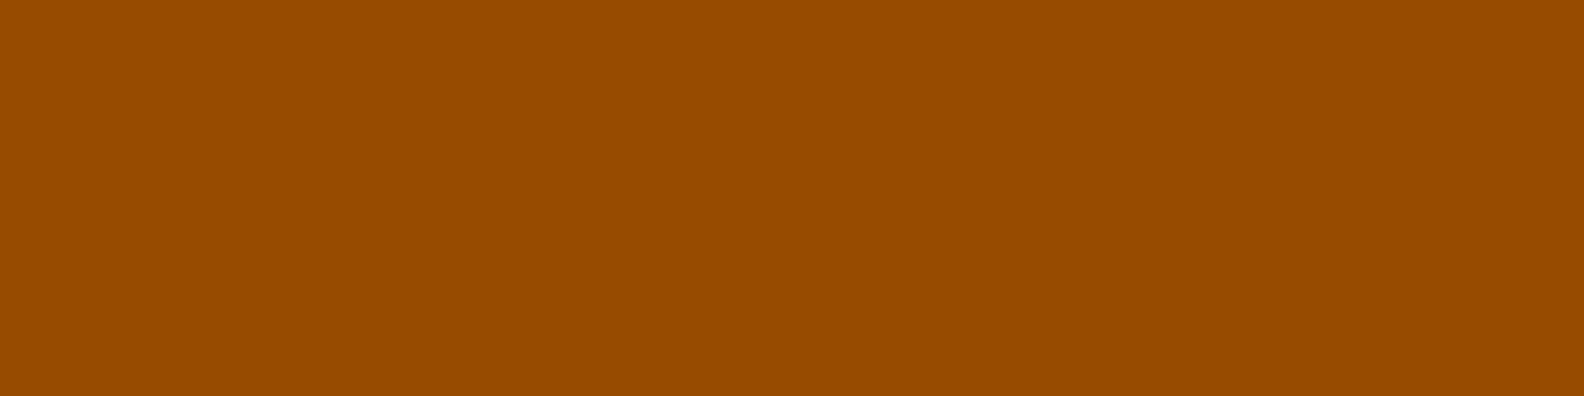 1584x396 Brown Traditional Solid Color Background